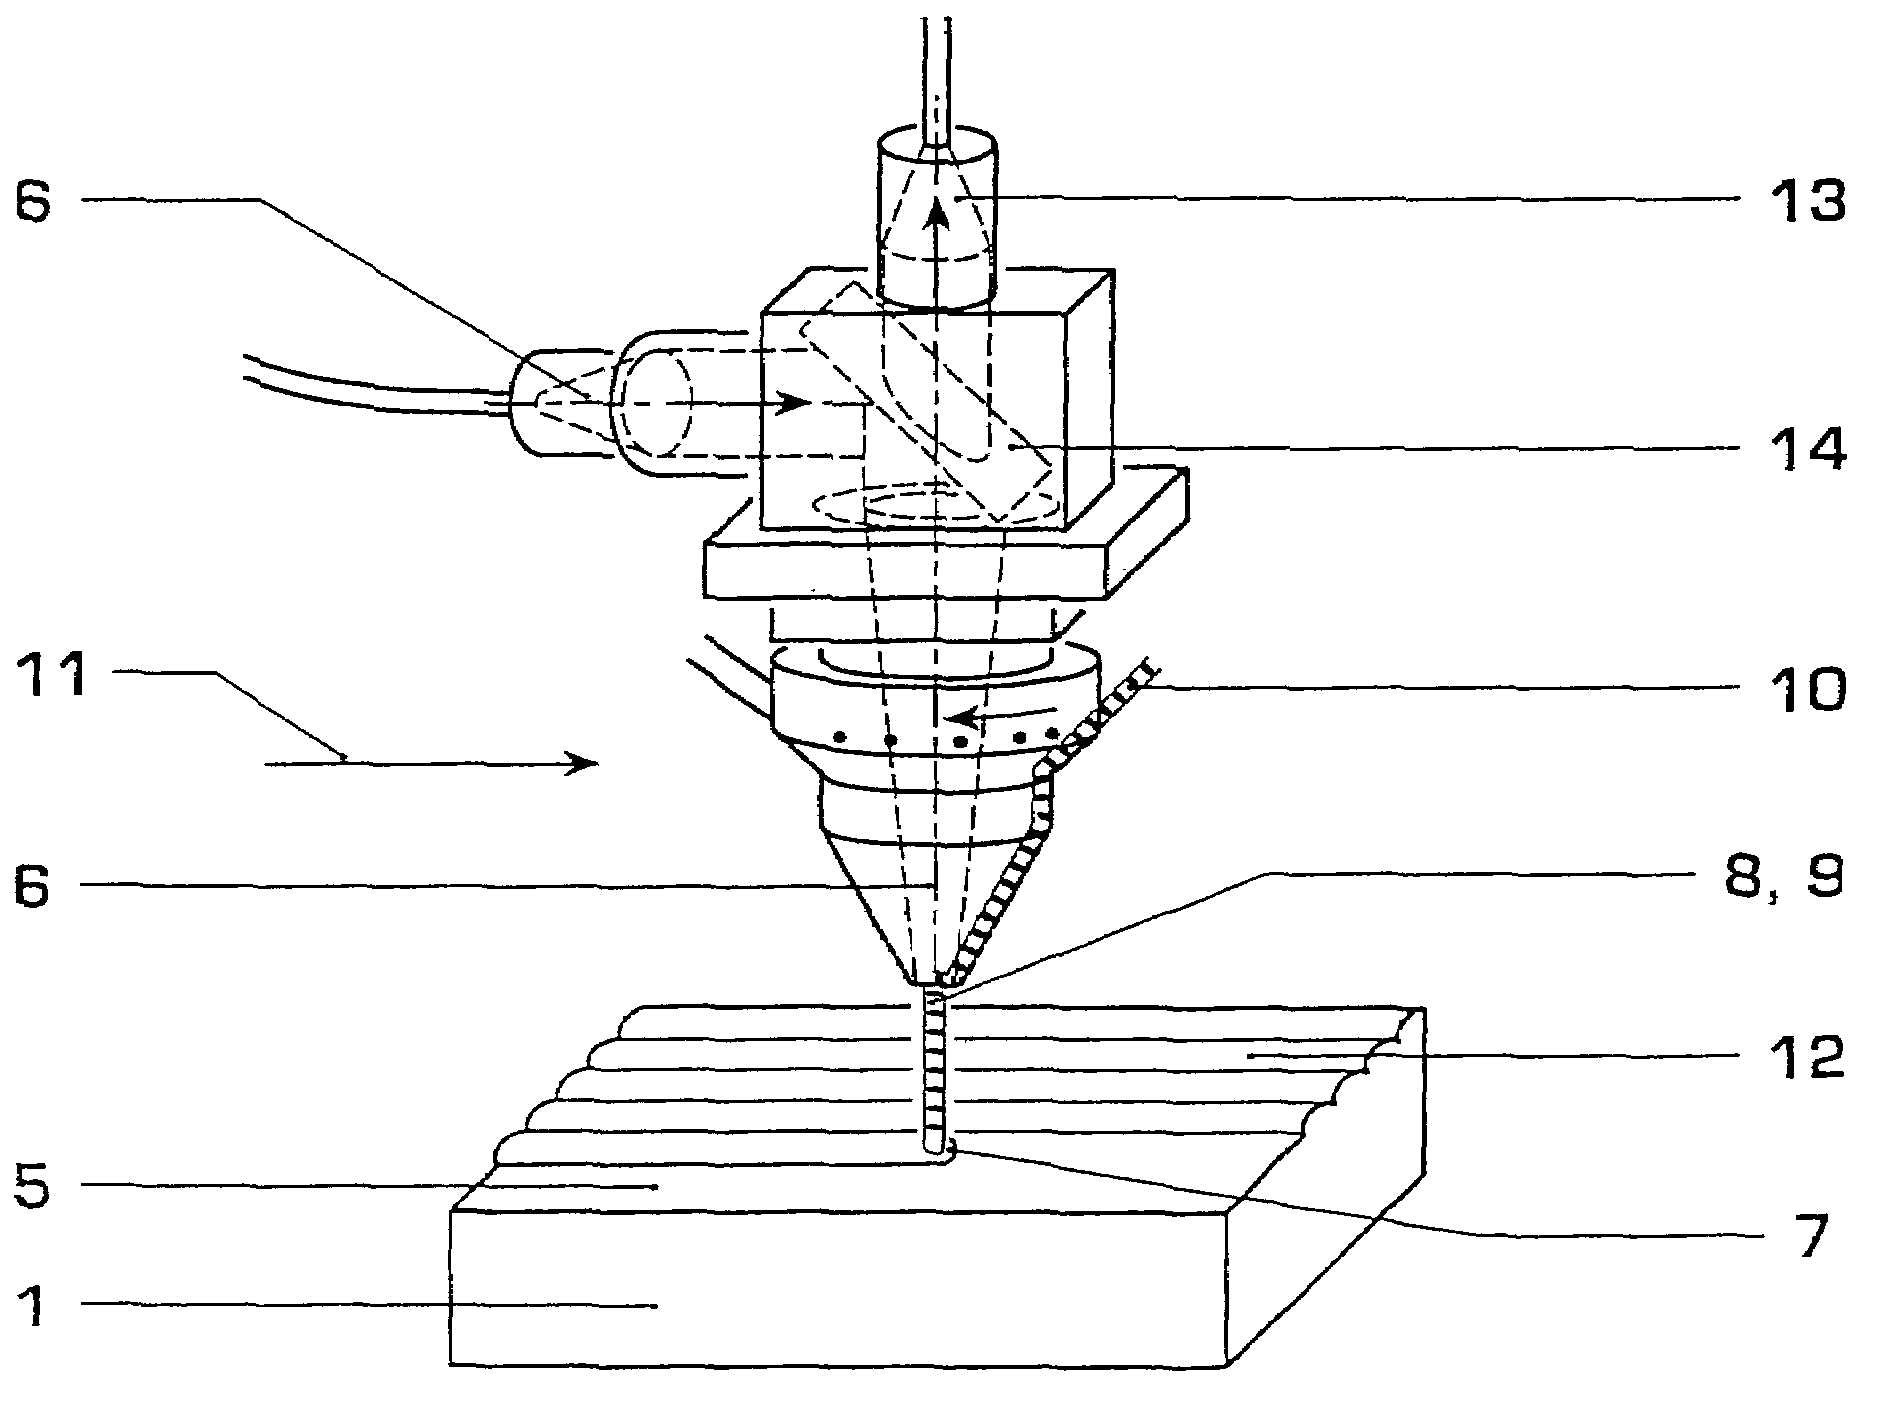 Method of controlled remelting of or laser metal forming on the surface of an article